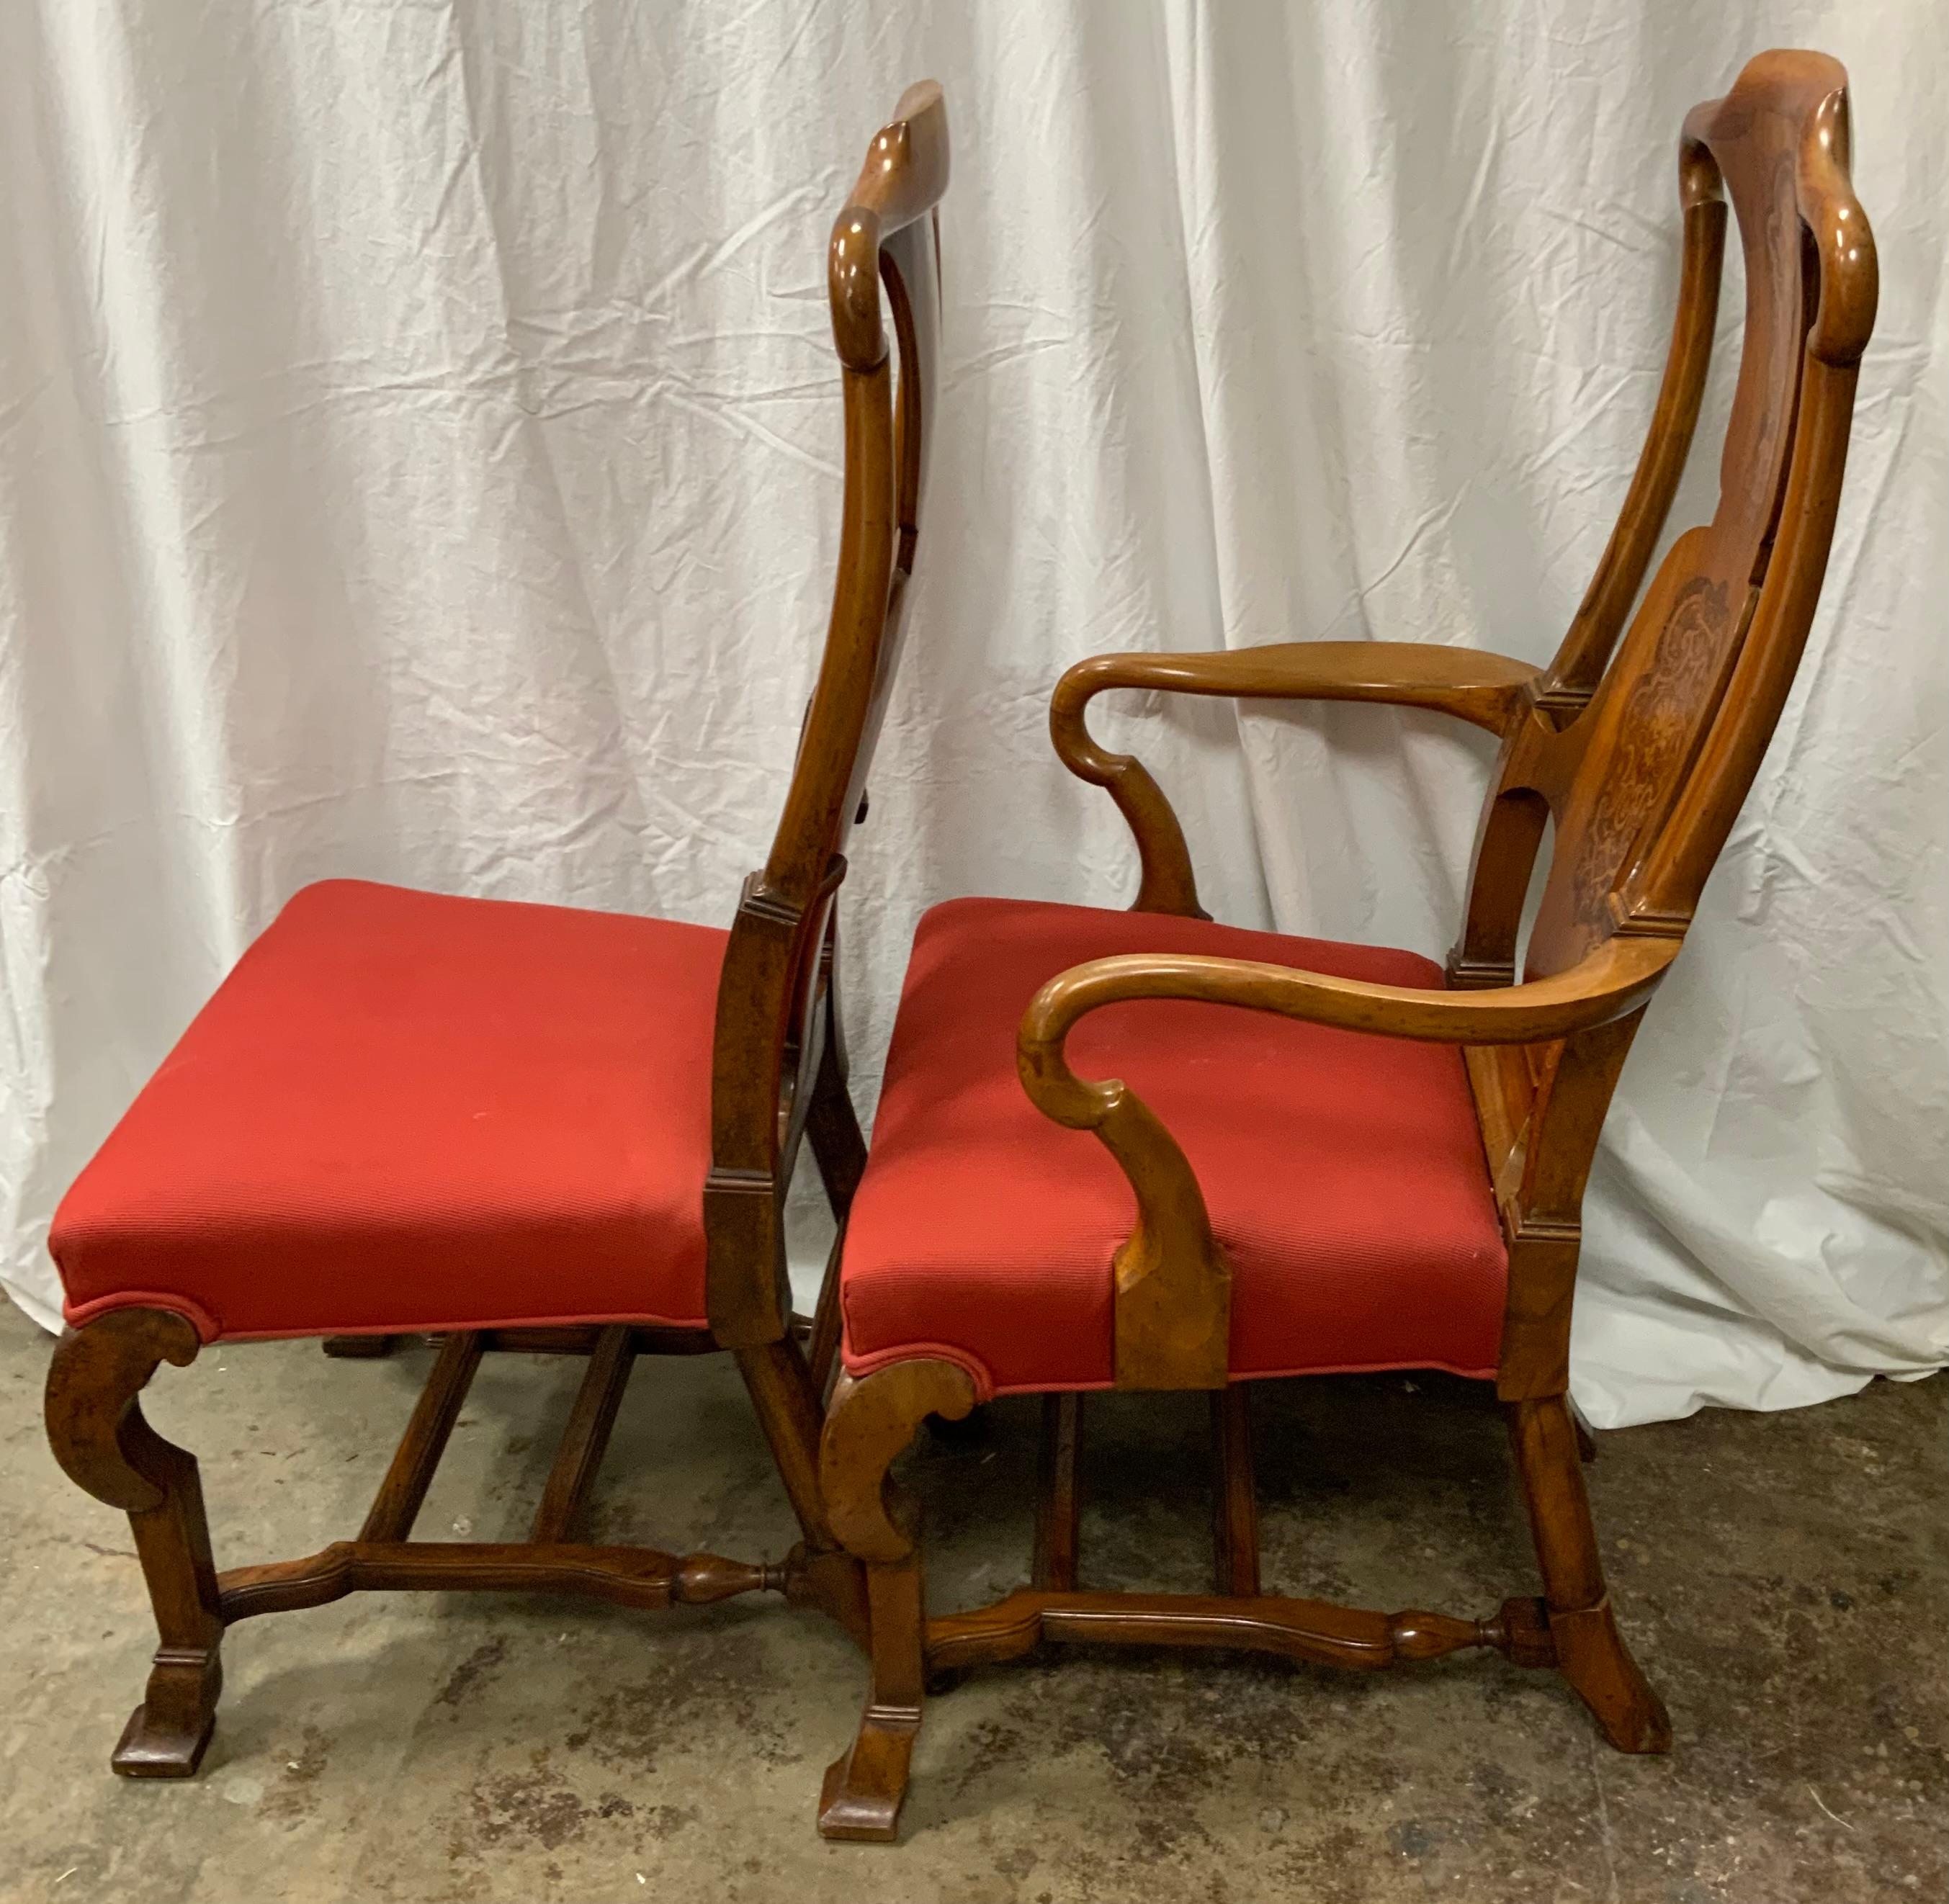 British Set of 10 English dining chairs, 19 th c. Walnut with marquetry inlay For Sale